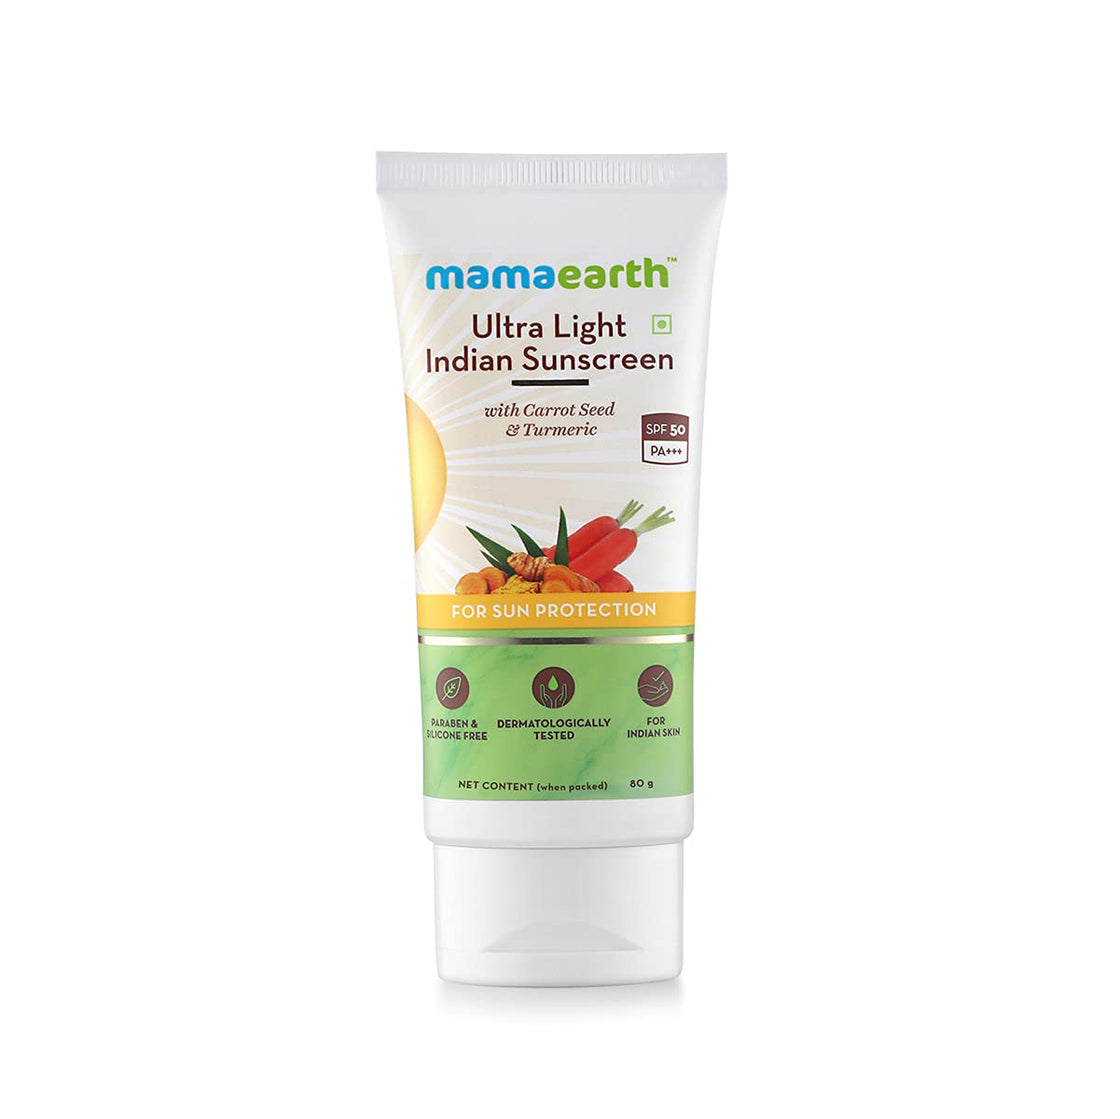 Mamaearth Ultra Light Indian Sunscreen Spf50 Pa+++ With Turmeric & Carrot Seed